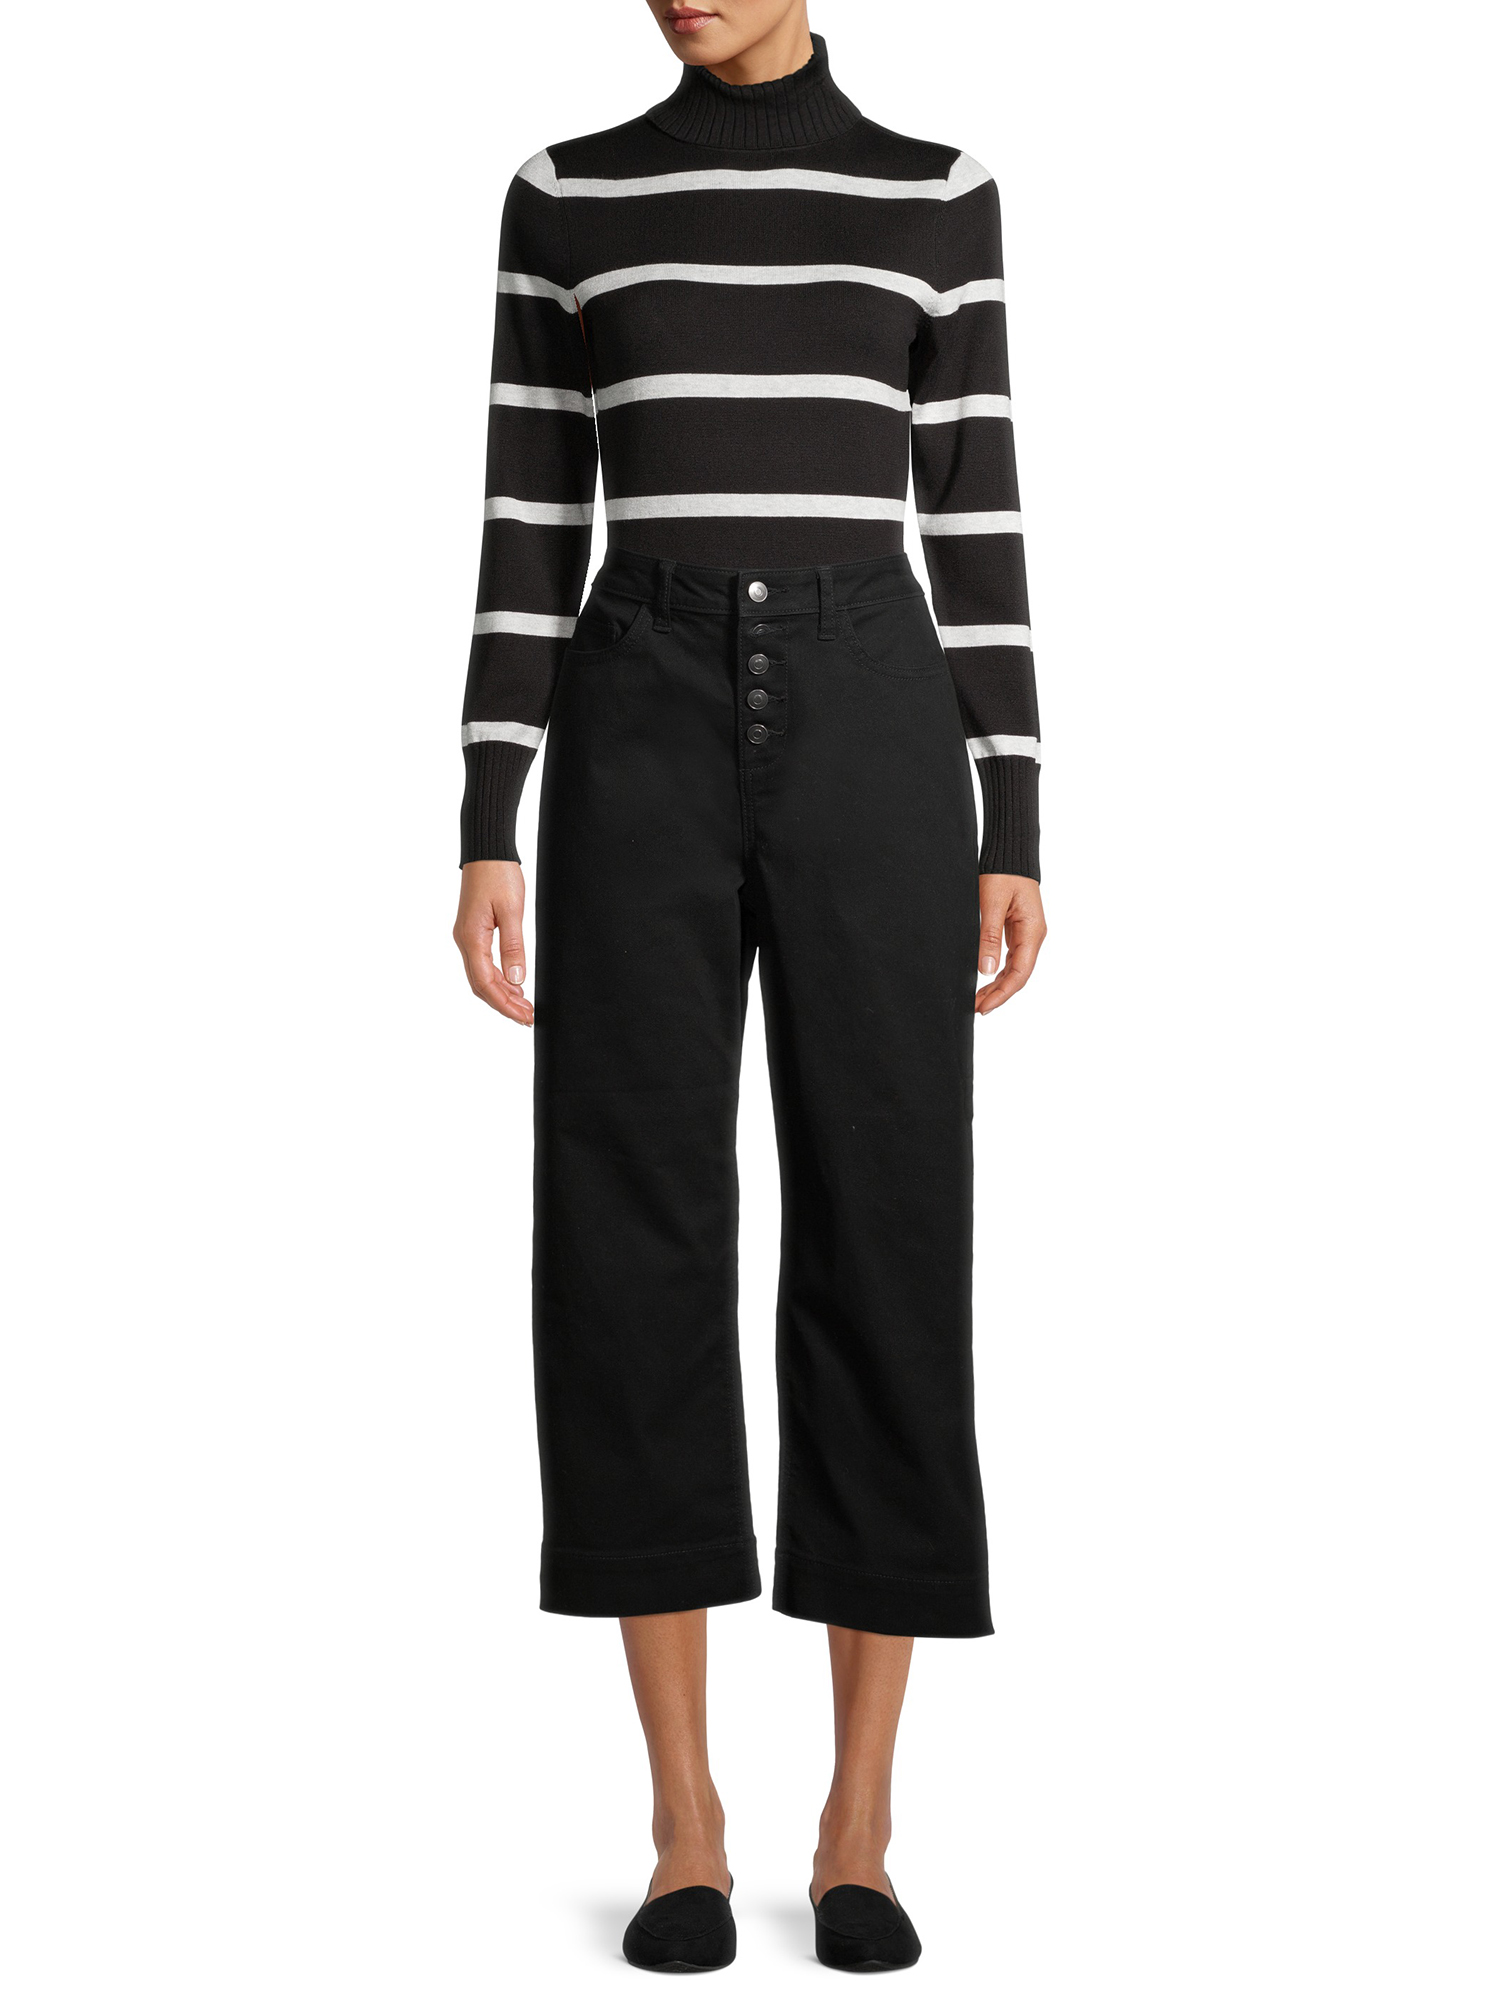 Time and Tru Women's Striped Turtleneck Sweater - image 2 of 6